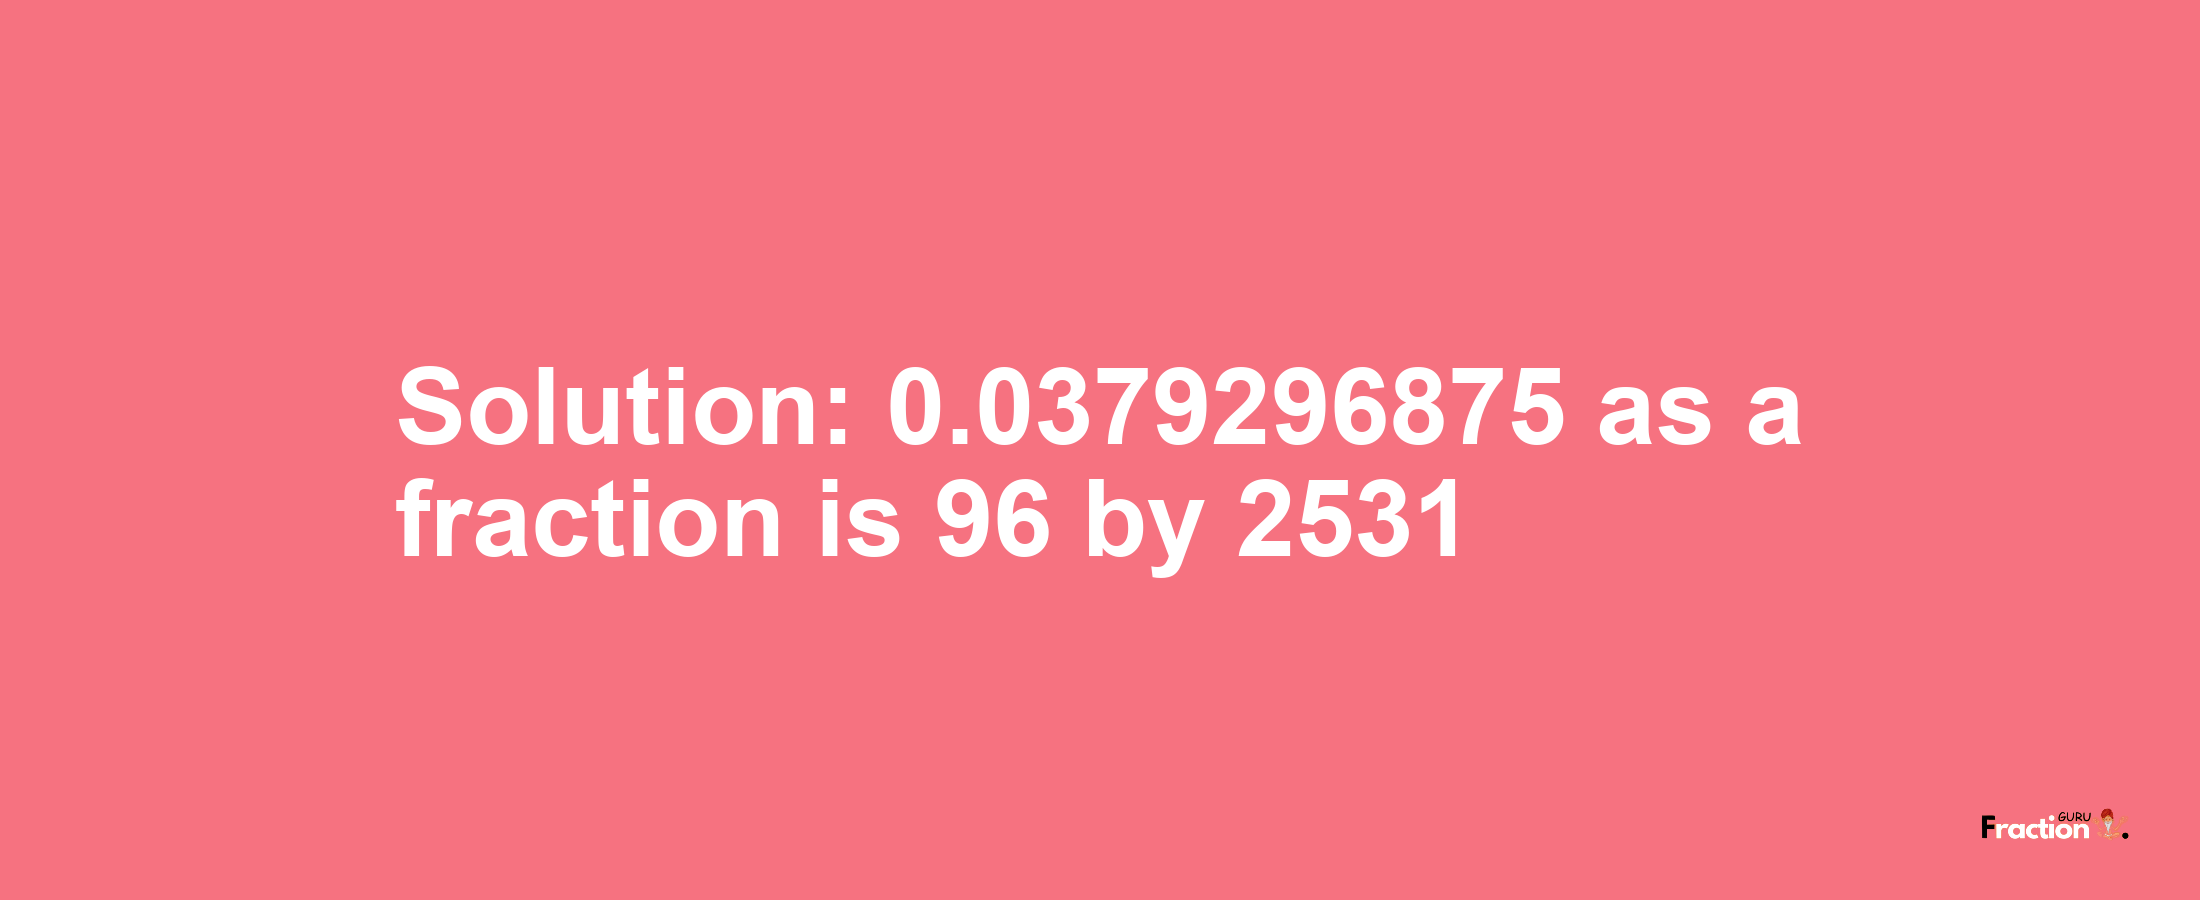 Solution:0.0379296875 as a fraction is 96/2531